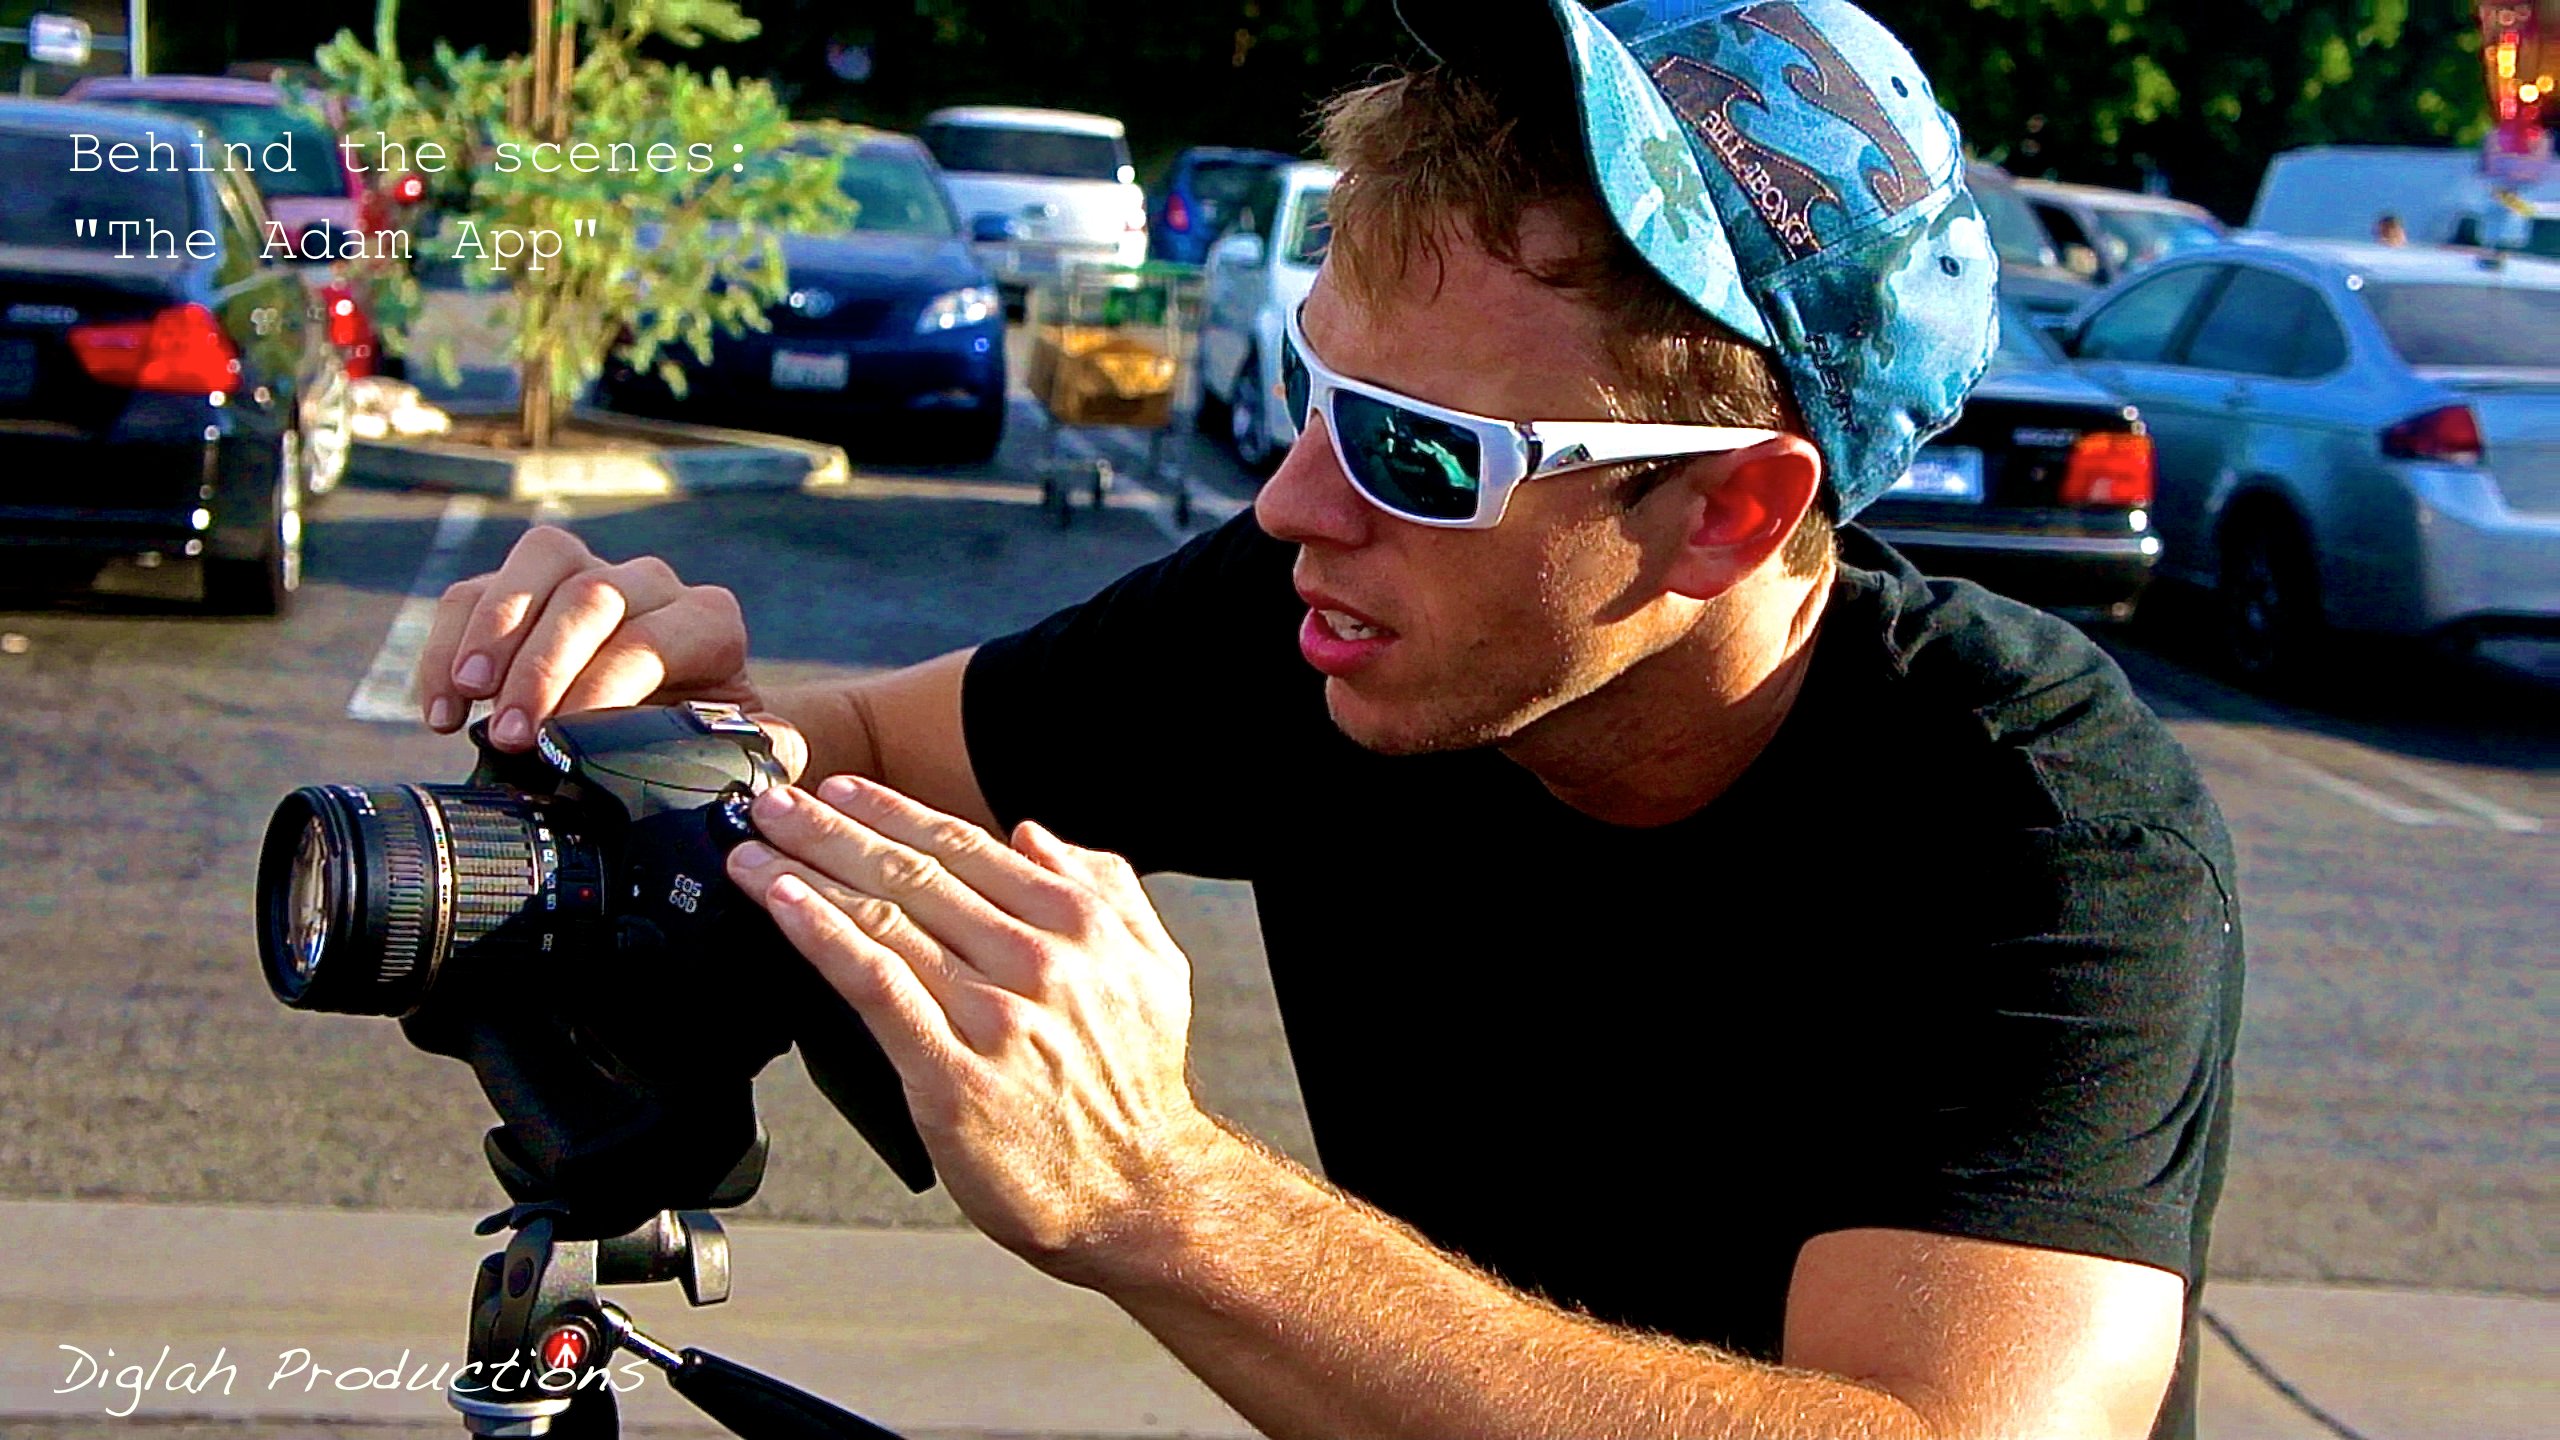 Directing Independent Short